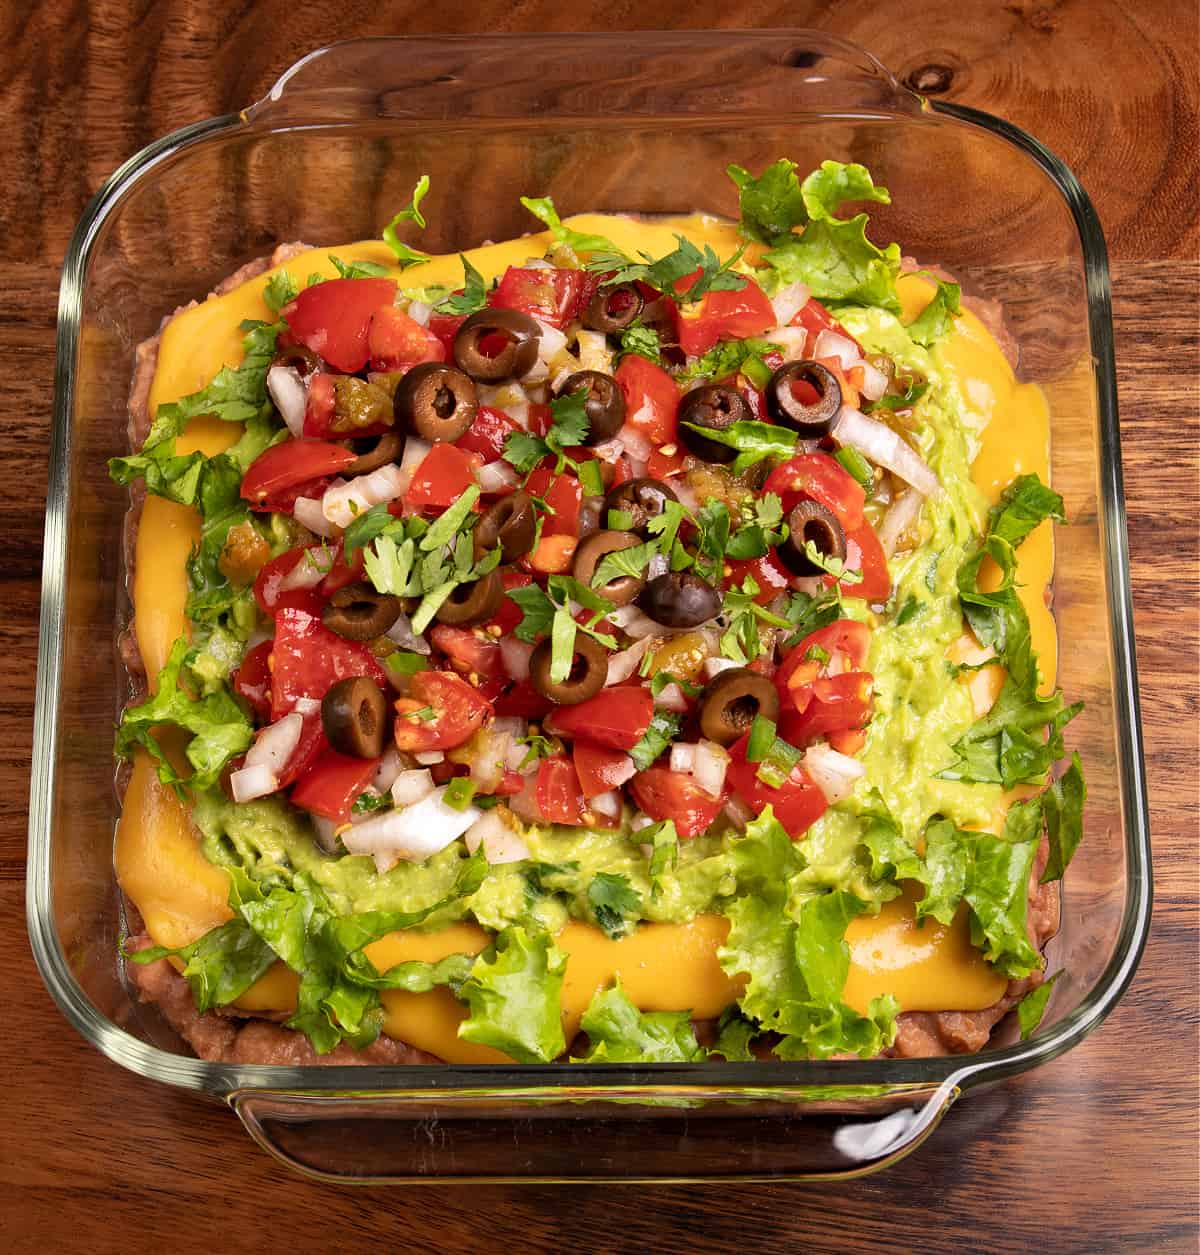 Top down photo of my 7 layer dip topped with homemade Pico De Gallo, black olives, shredded lettuce, and cilantro